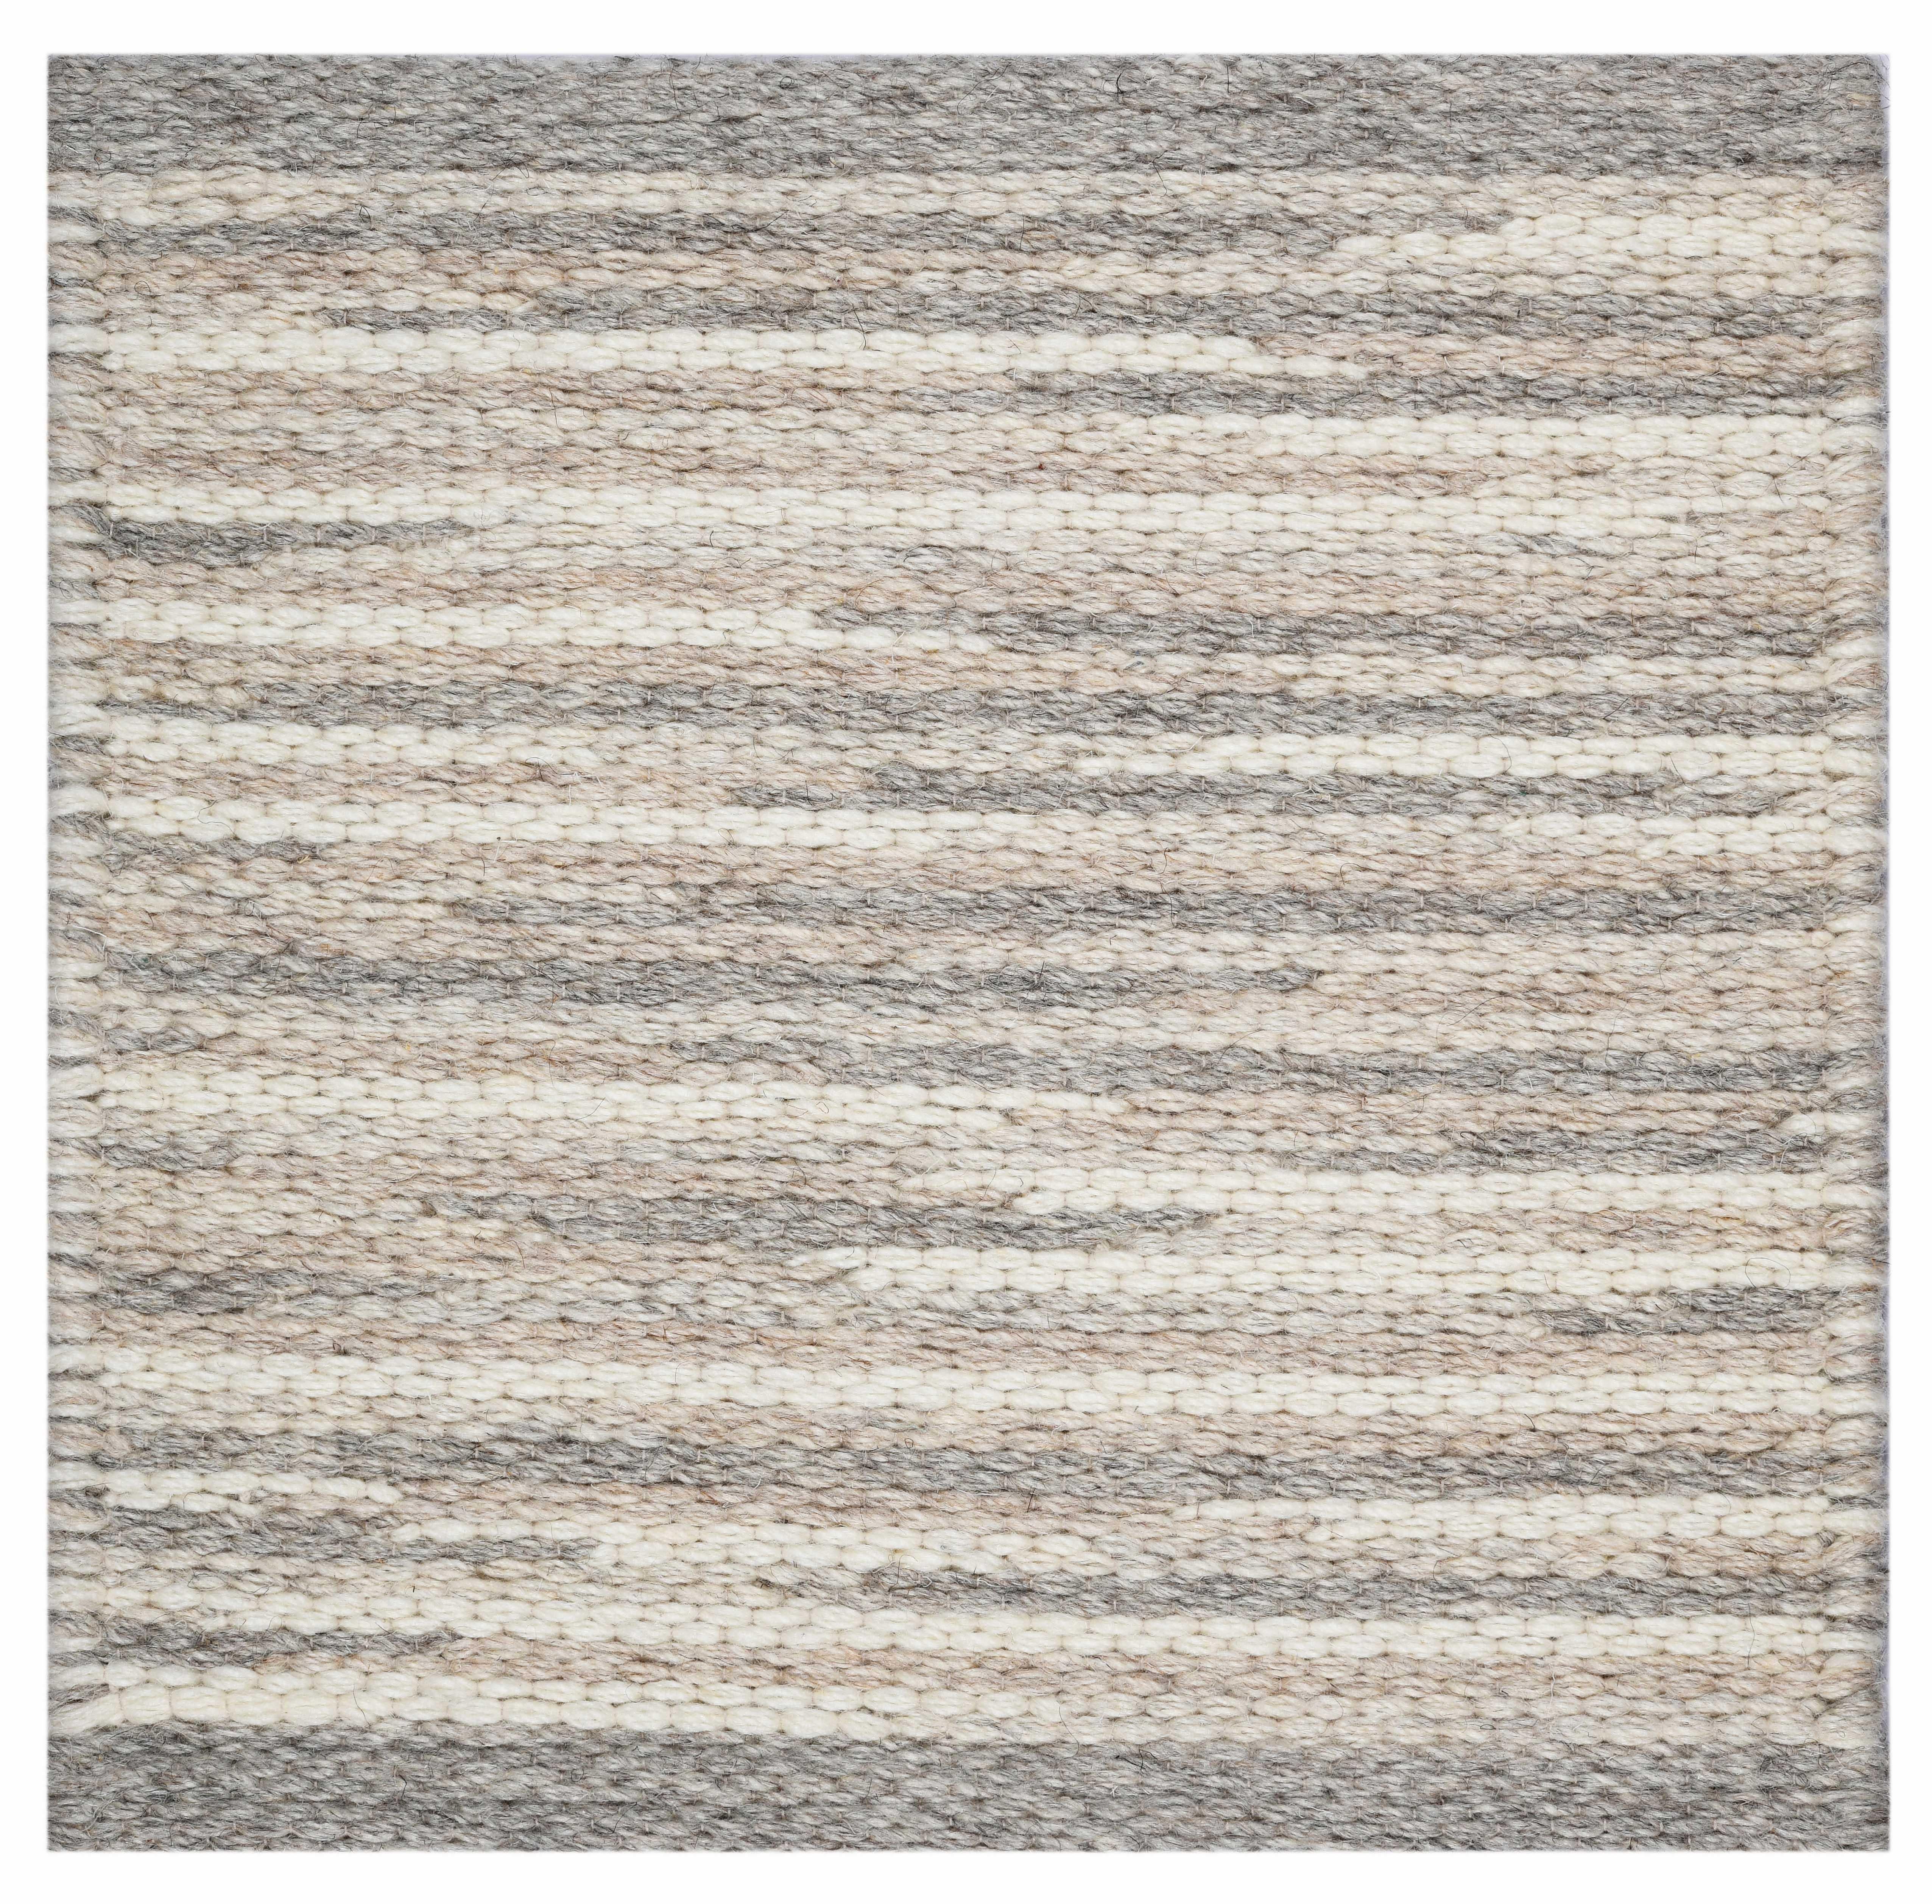 Contemporary Rivus, Stone, Handwoven Face 60% Undyed NZ Wool, 40% Undyed MED Wool, 8' x 10' For Sale